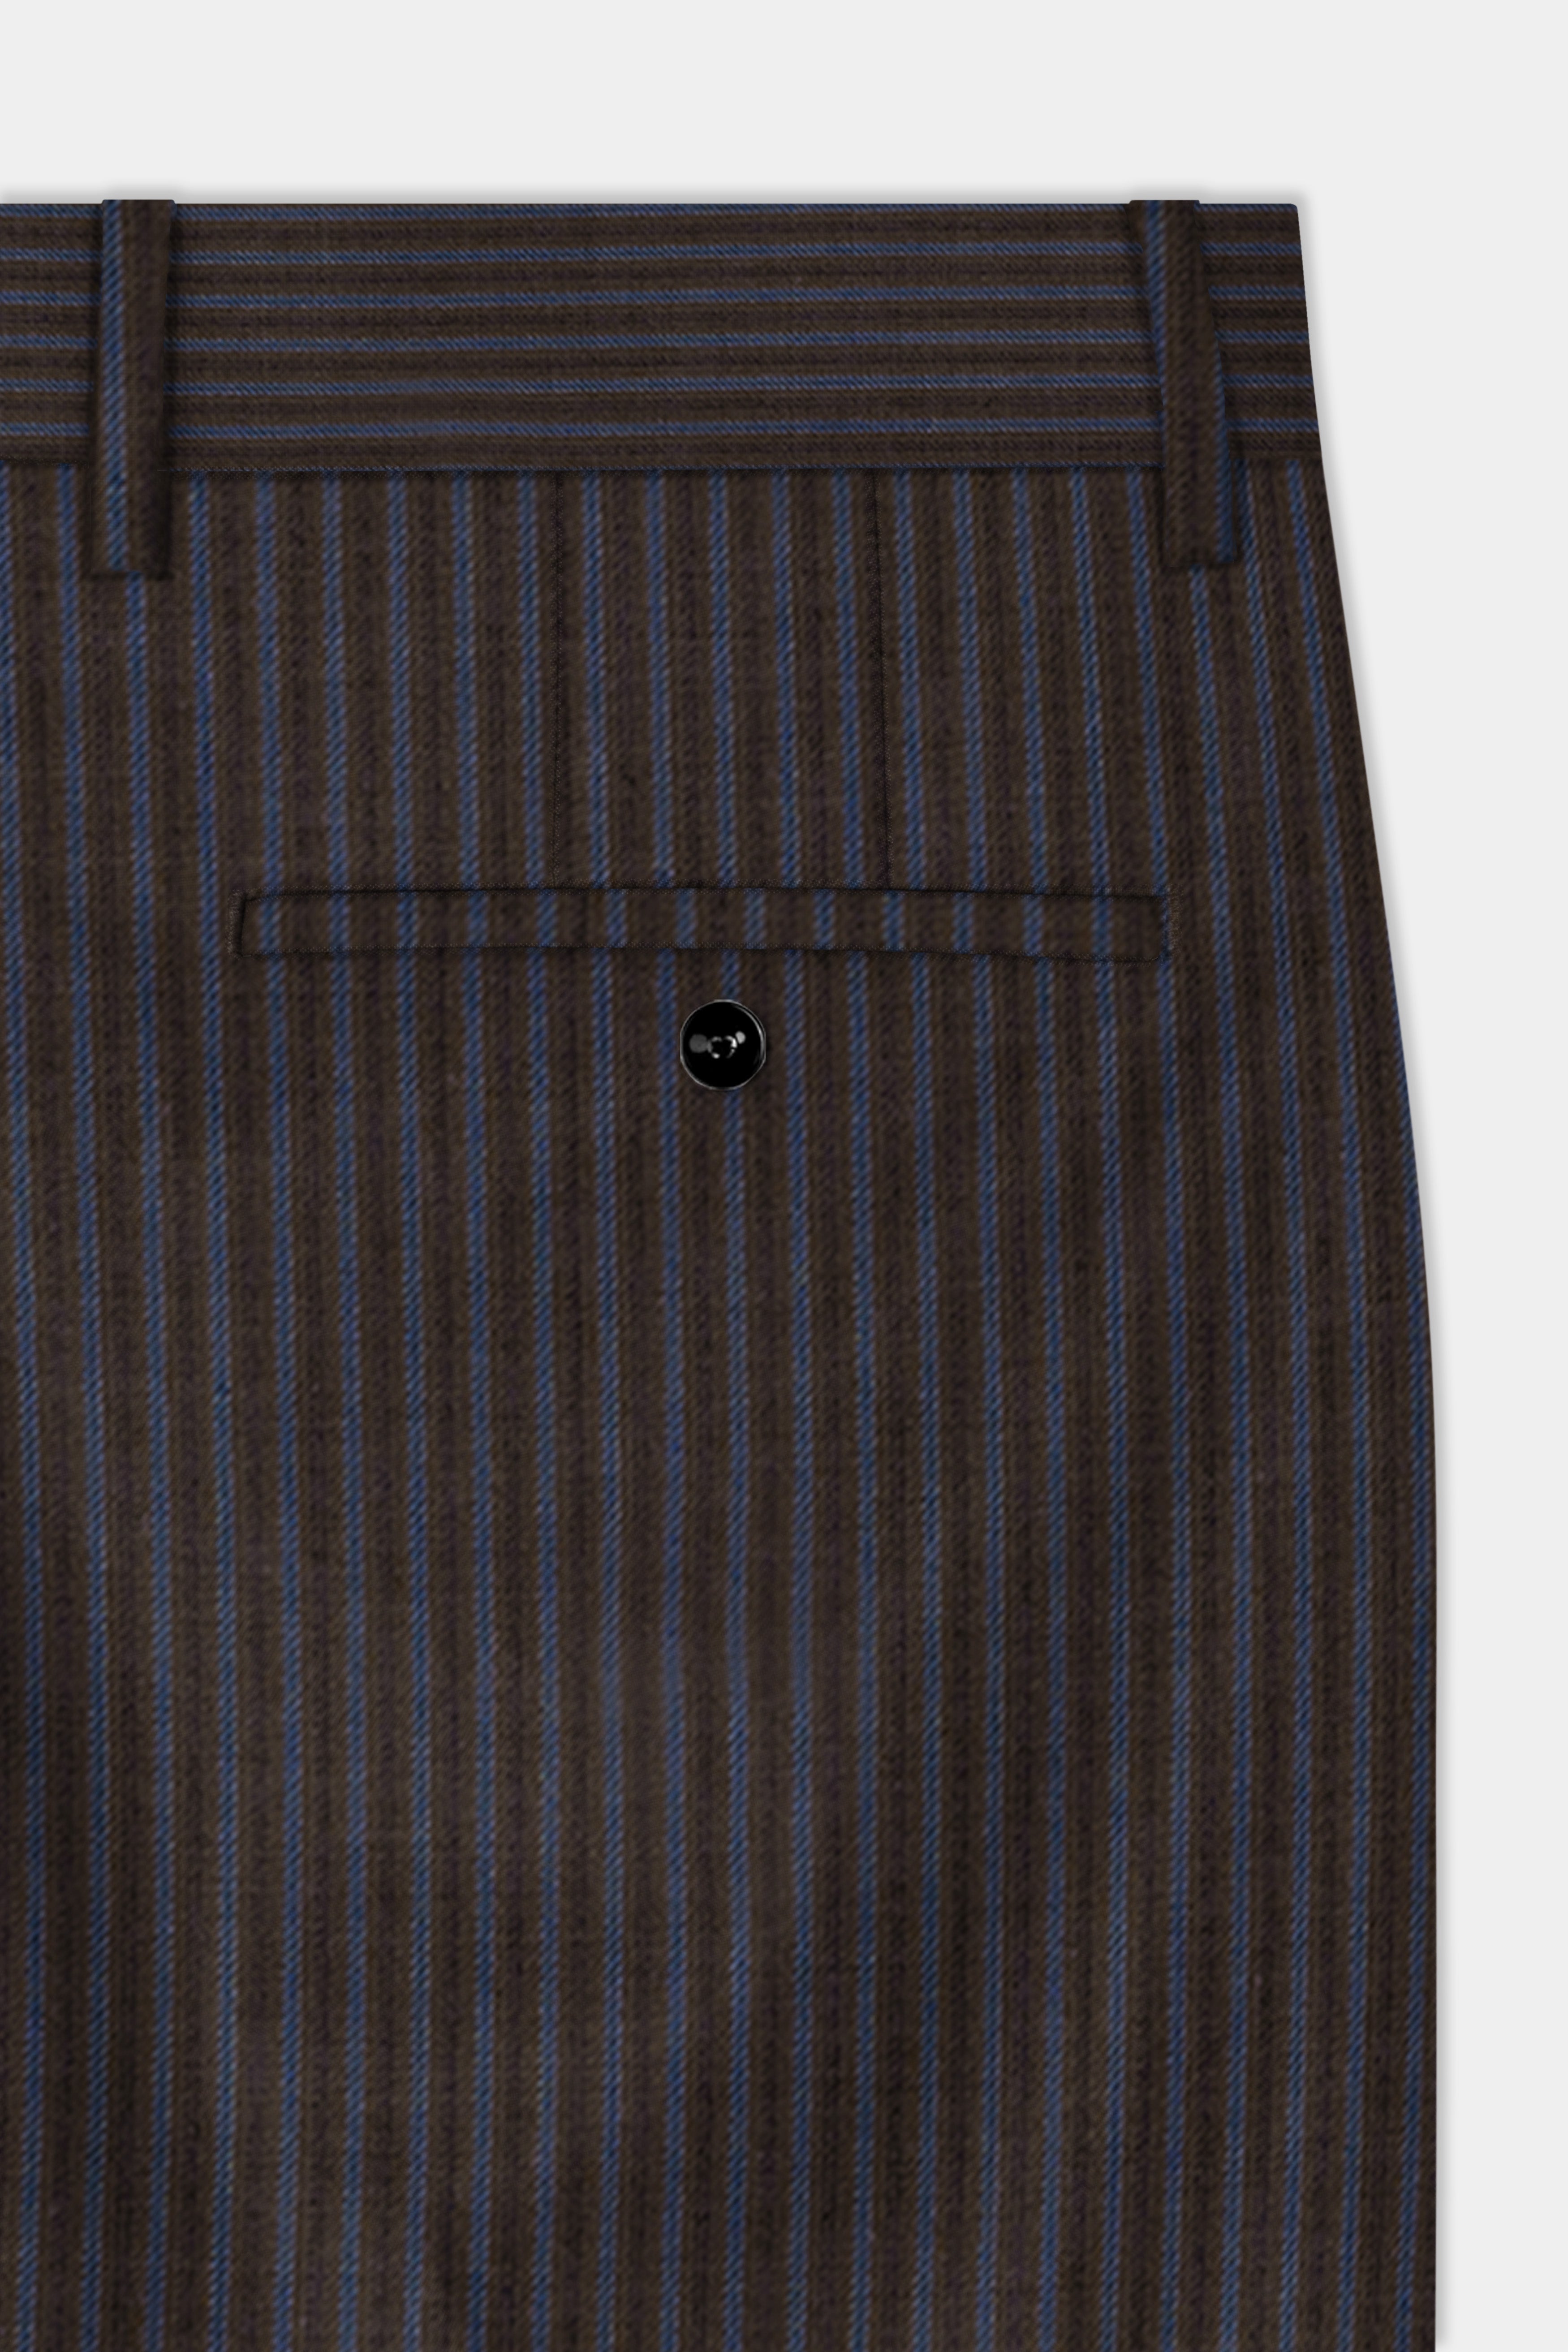 Eclipse Brown with Kashmir Blue Striped Wool Blend Suit